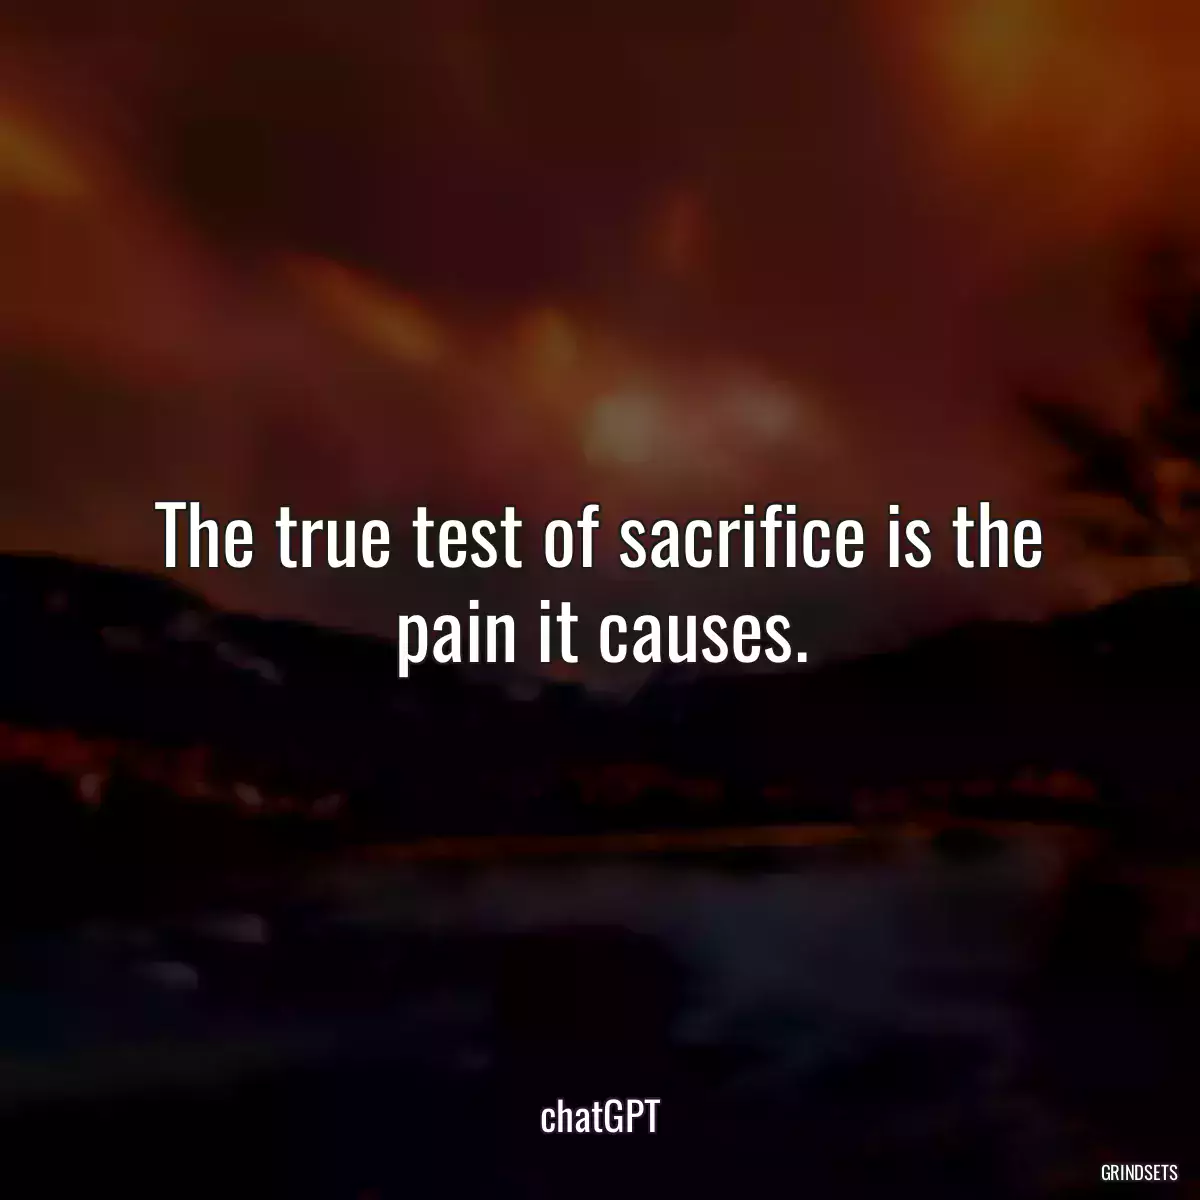 The true test of sacrifice is the pain it causes.